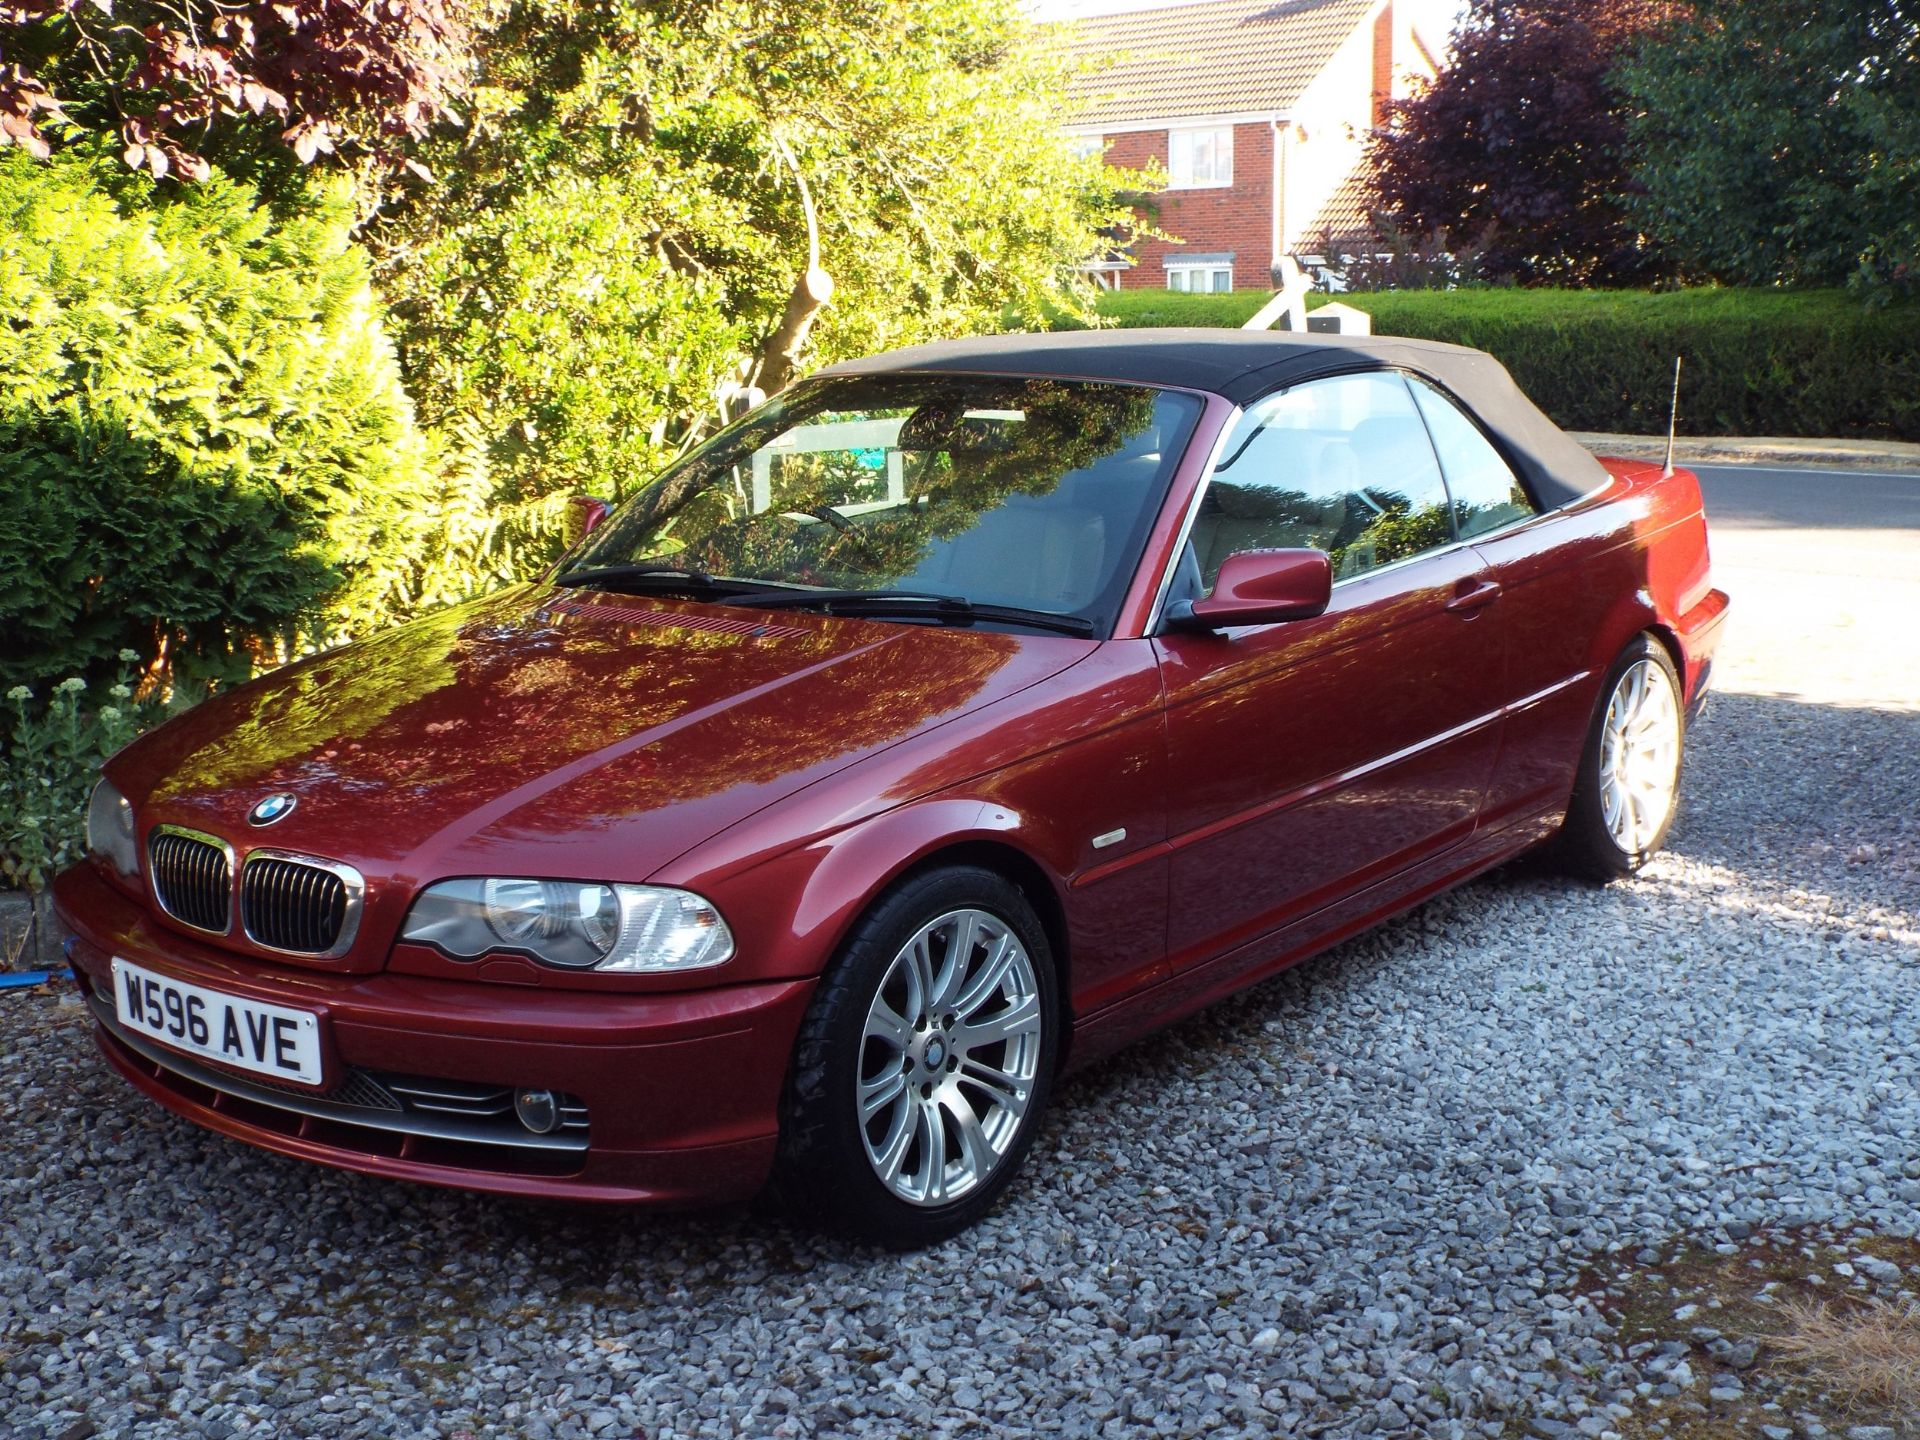 2000 BMW 330Ci Convertible Registration number W596 AVE Chassis number WBABS52060EH92204 Engine - Image 2 of 16